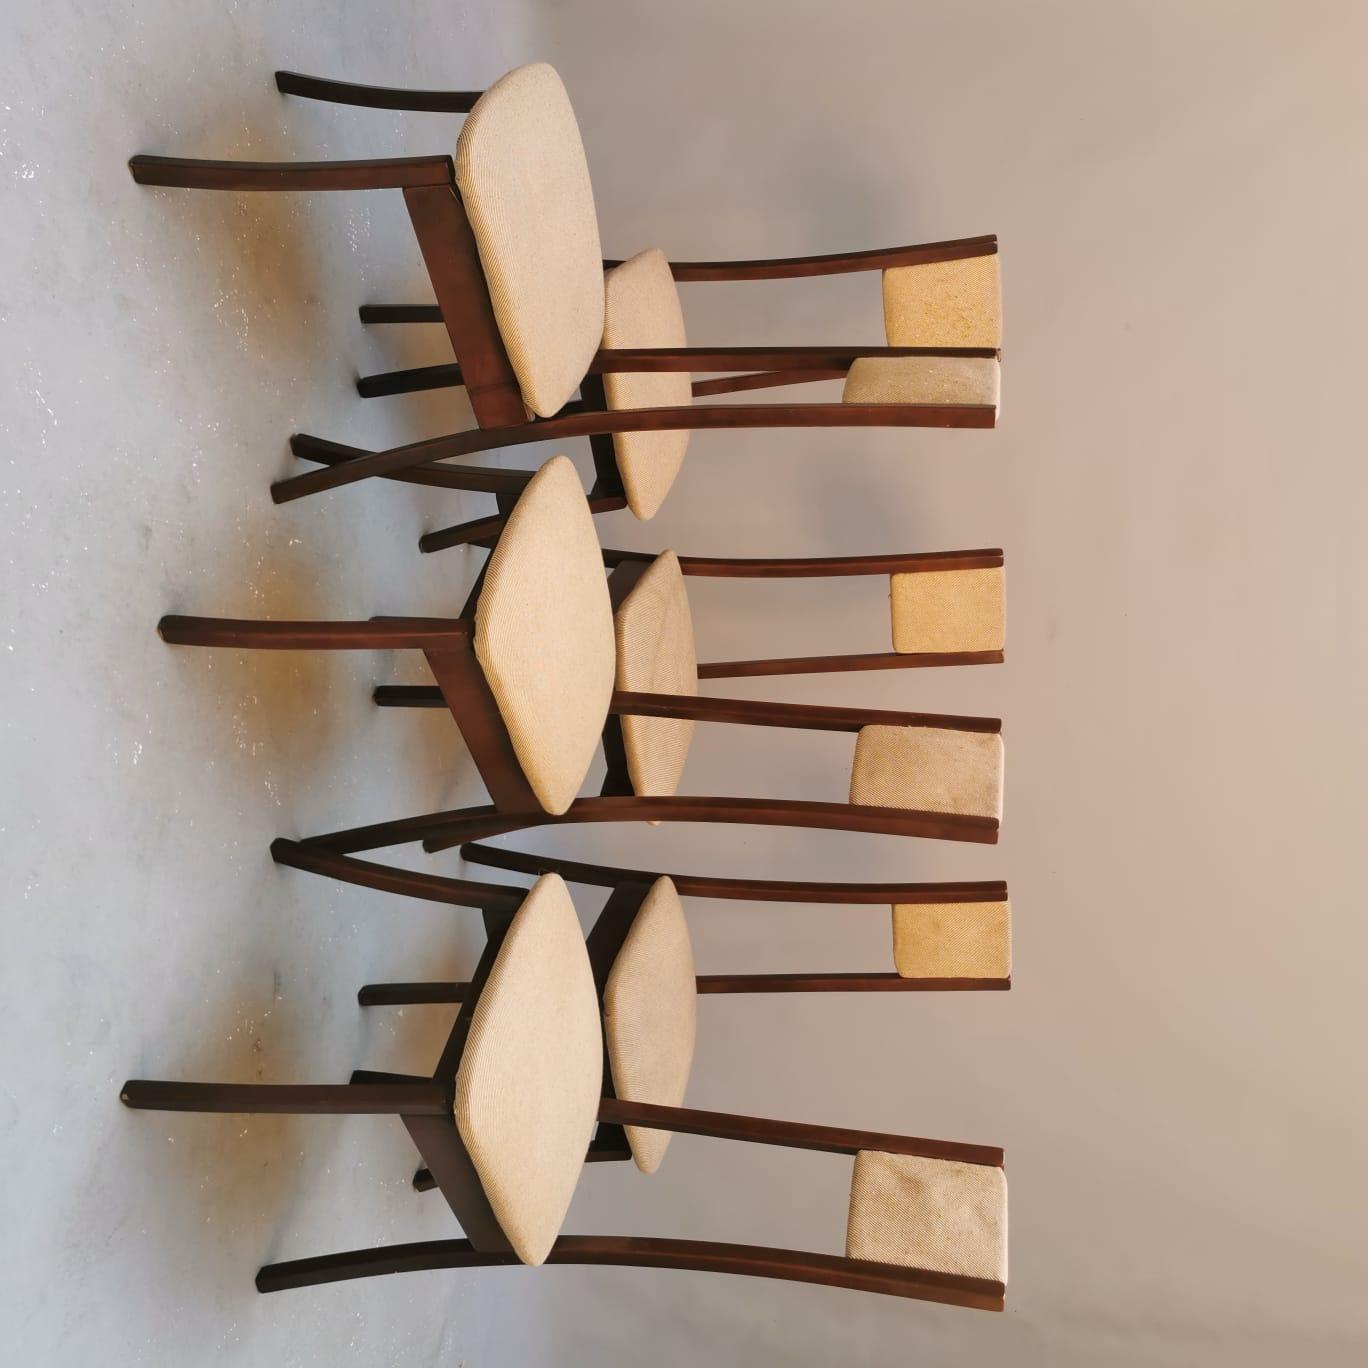 The set of six Angelo Mangiarotti Programma S11 chairs is a captivating blend of modernist design and functional elegance. These rare chairs, though requiring reupholstering, are in overall good condition, preserving their iconic silhouette and